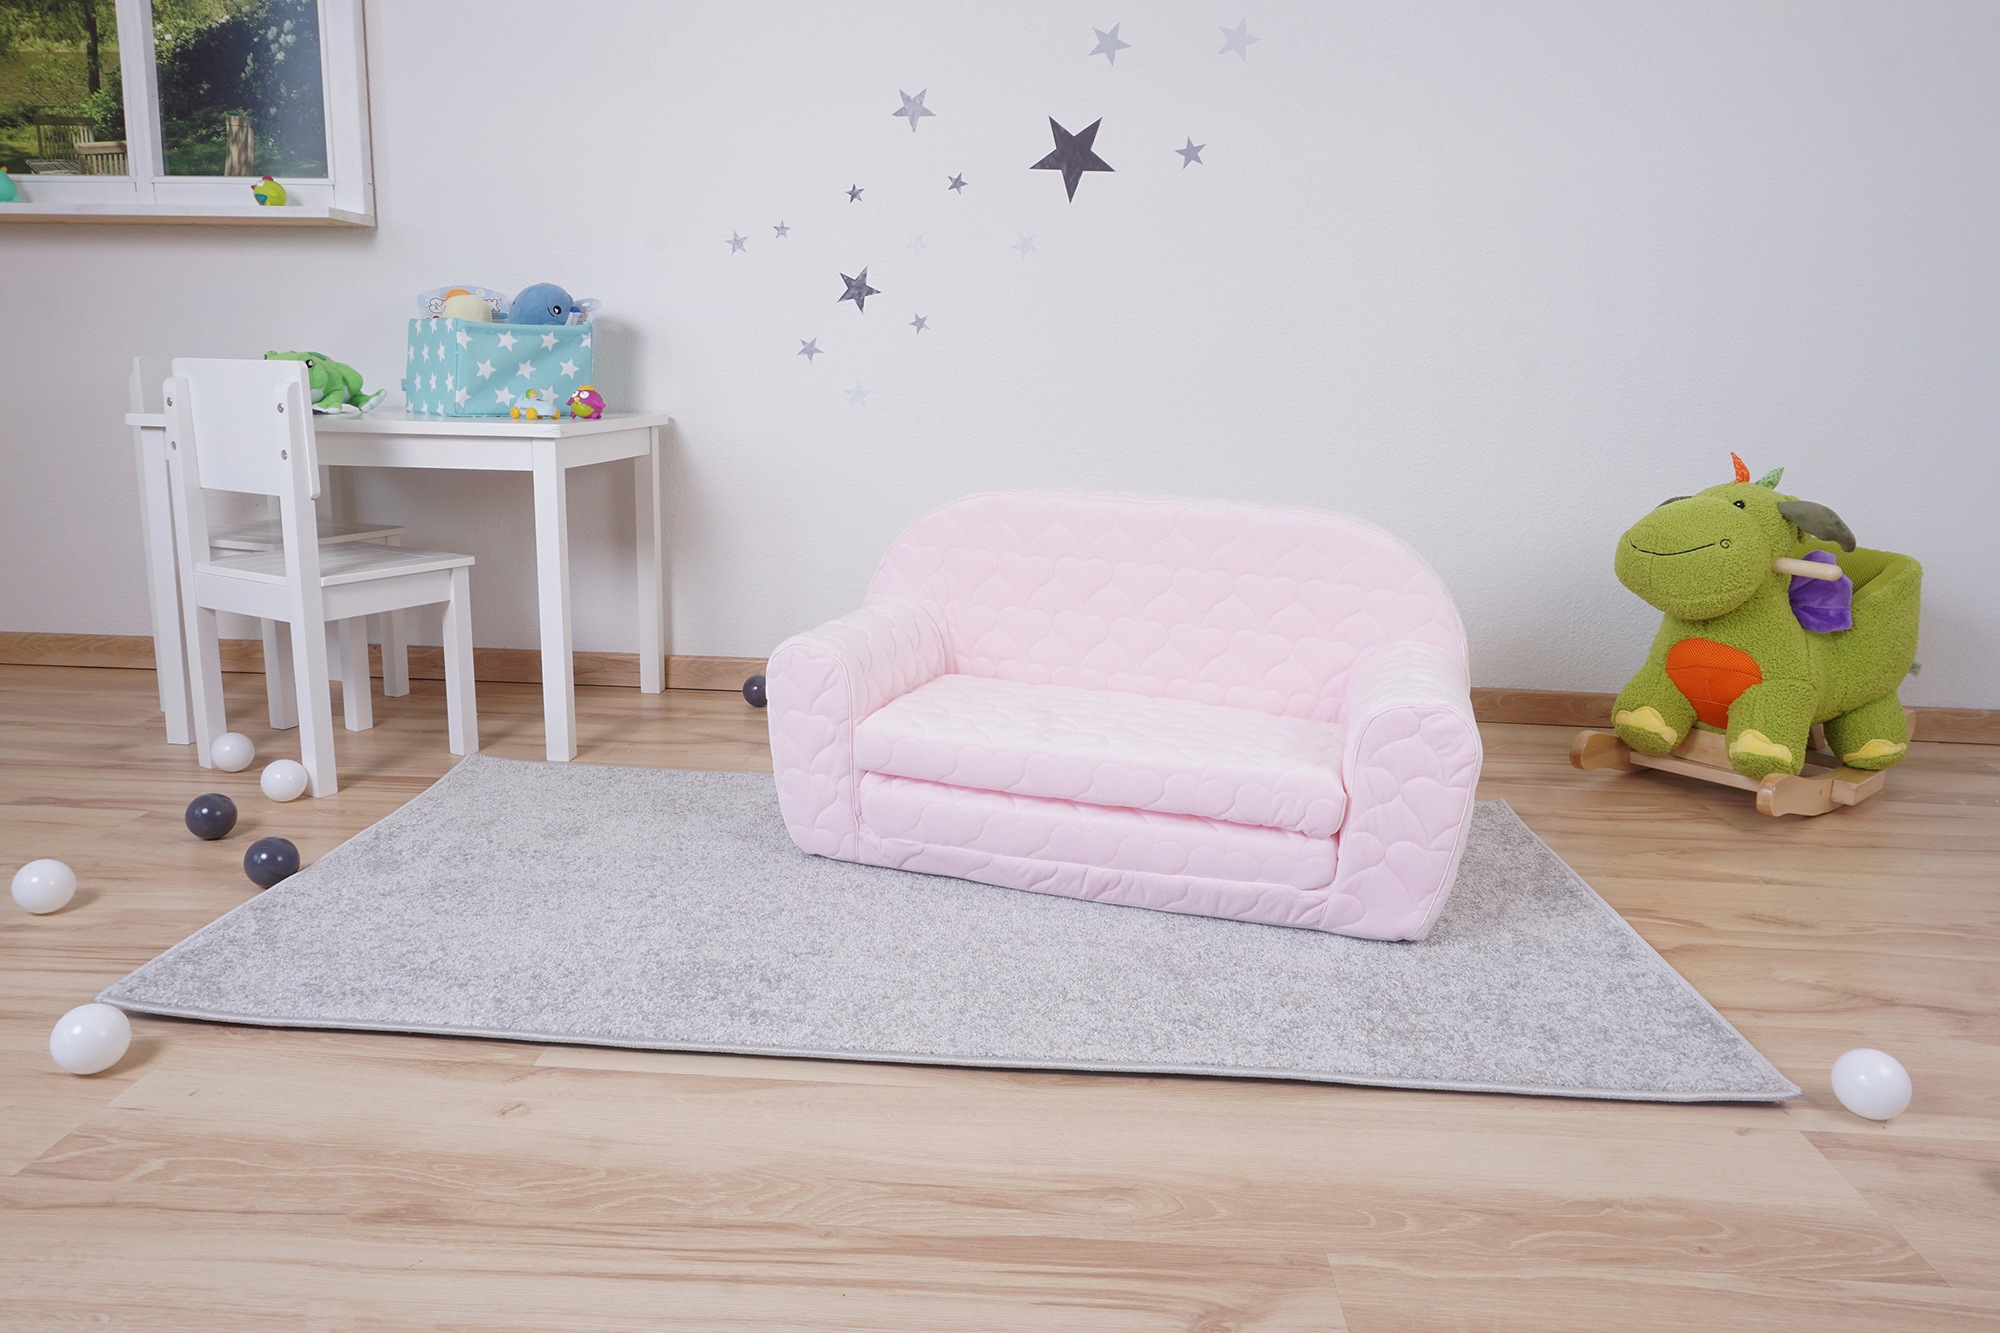 Knorrtoys® Sofa »Cosy, Heart Rose«, für Kinder; Made in Europe